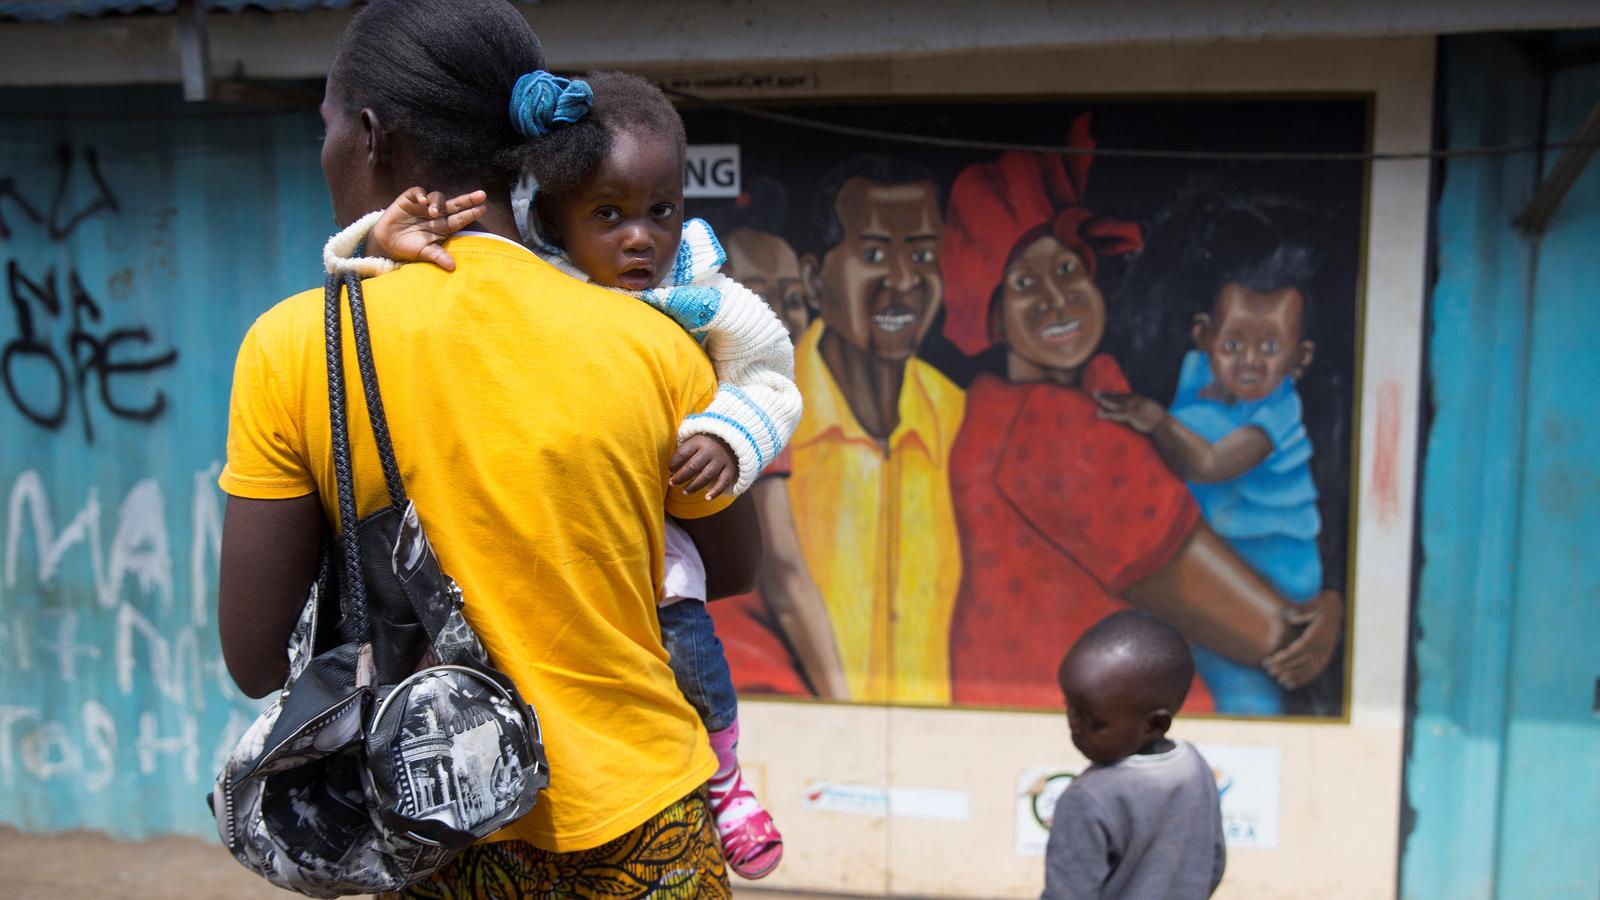 A woman wearing a yellow shirt holds a toddler in her arms near a mural.